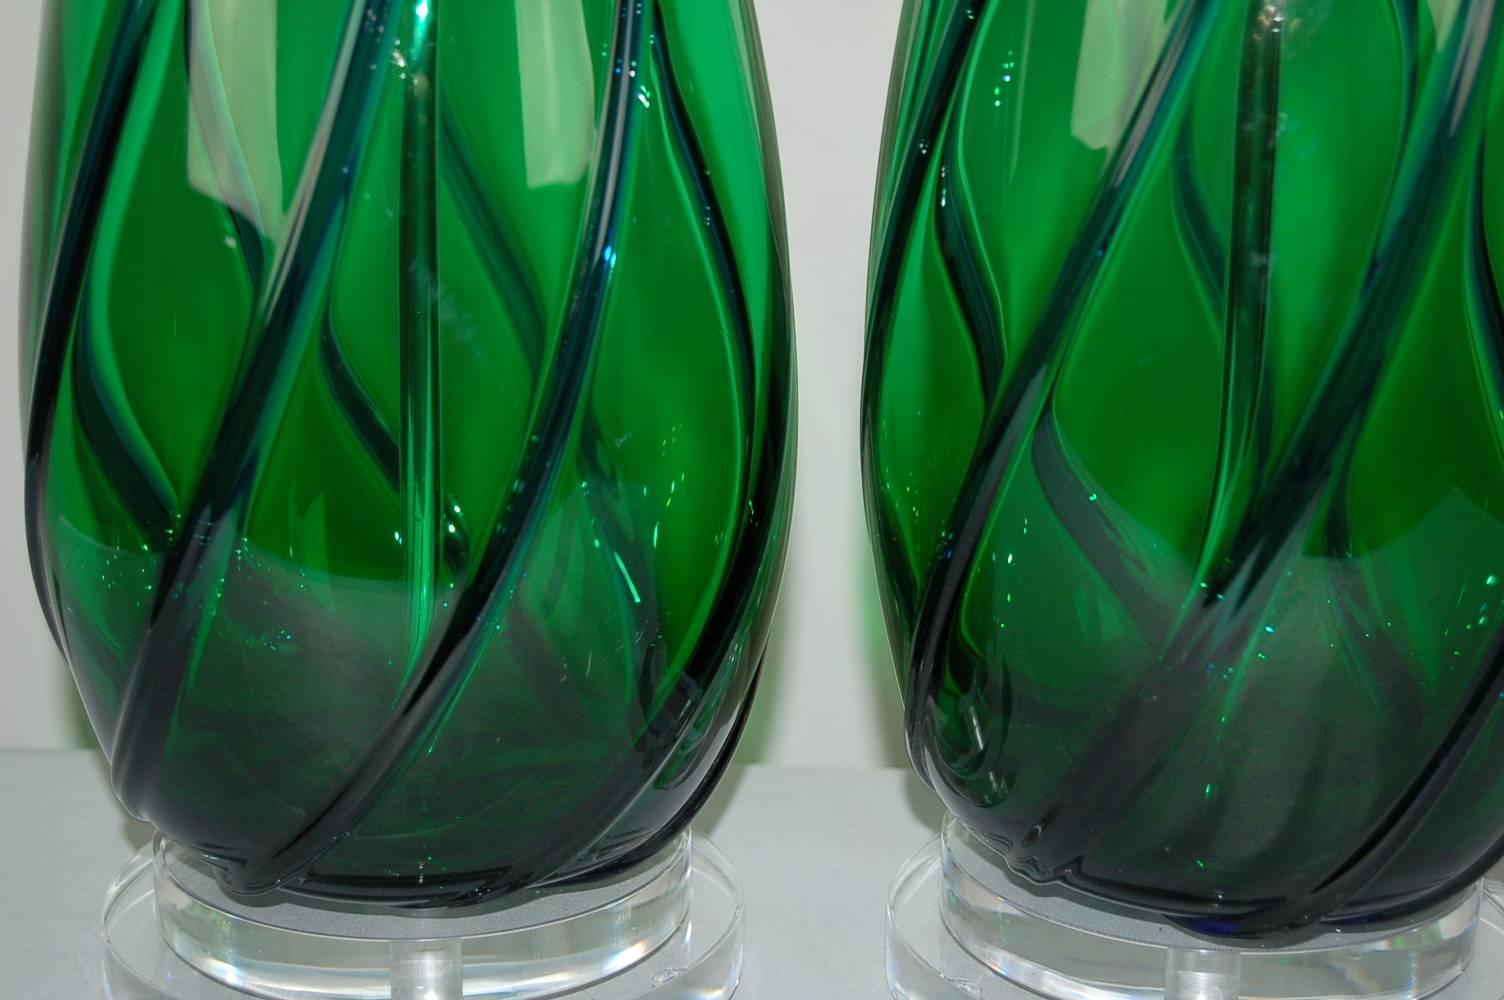 Plated Matched Pair of Vintage Murano Lamps in Green and Blue